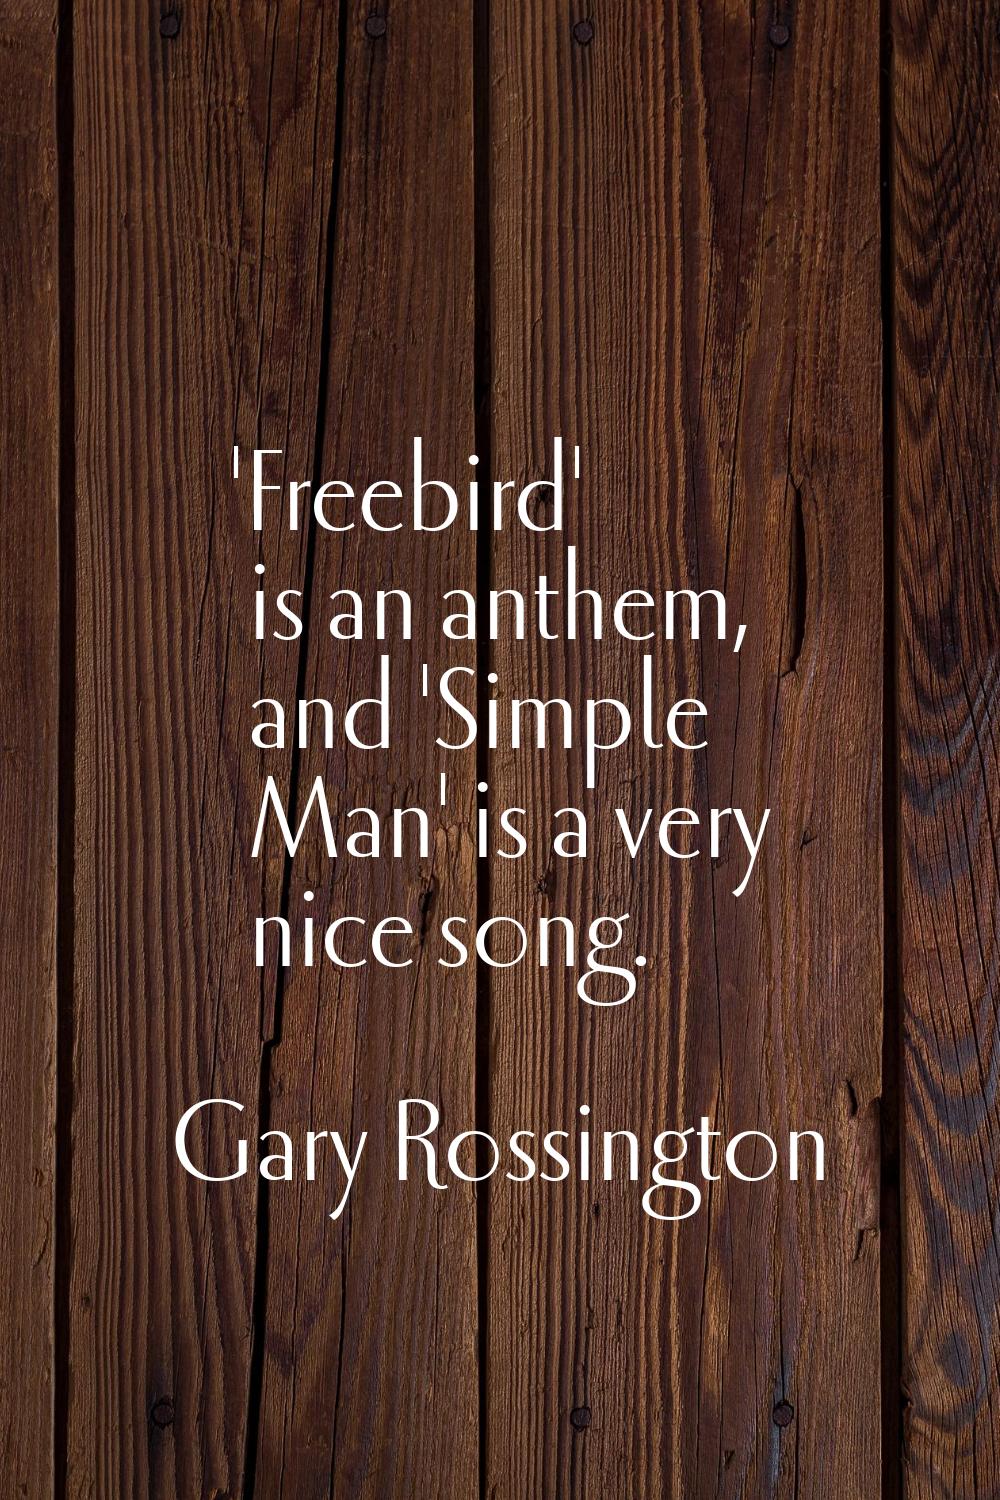 'Freebird' is an anthem, and 'Simple Man' is a very nice song.